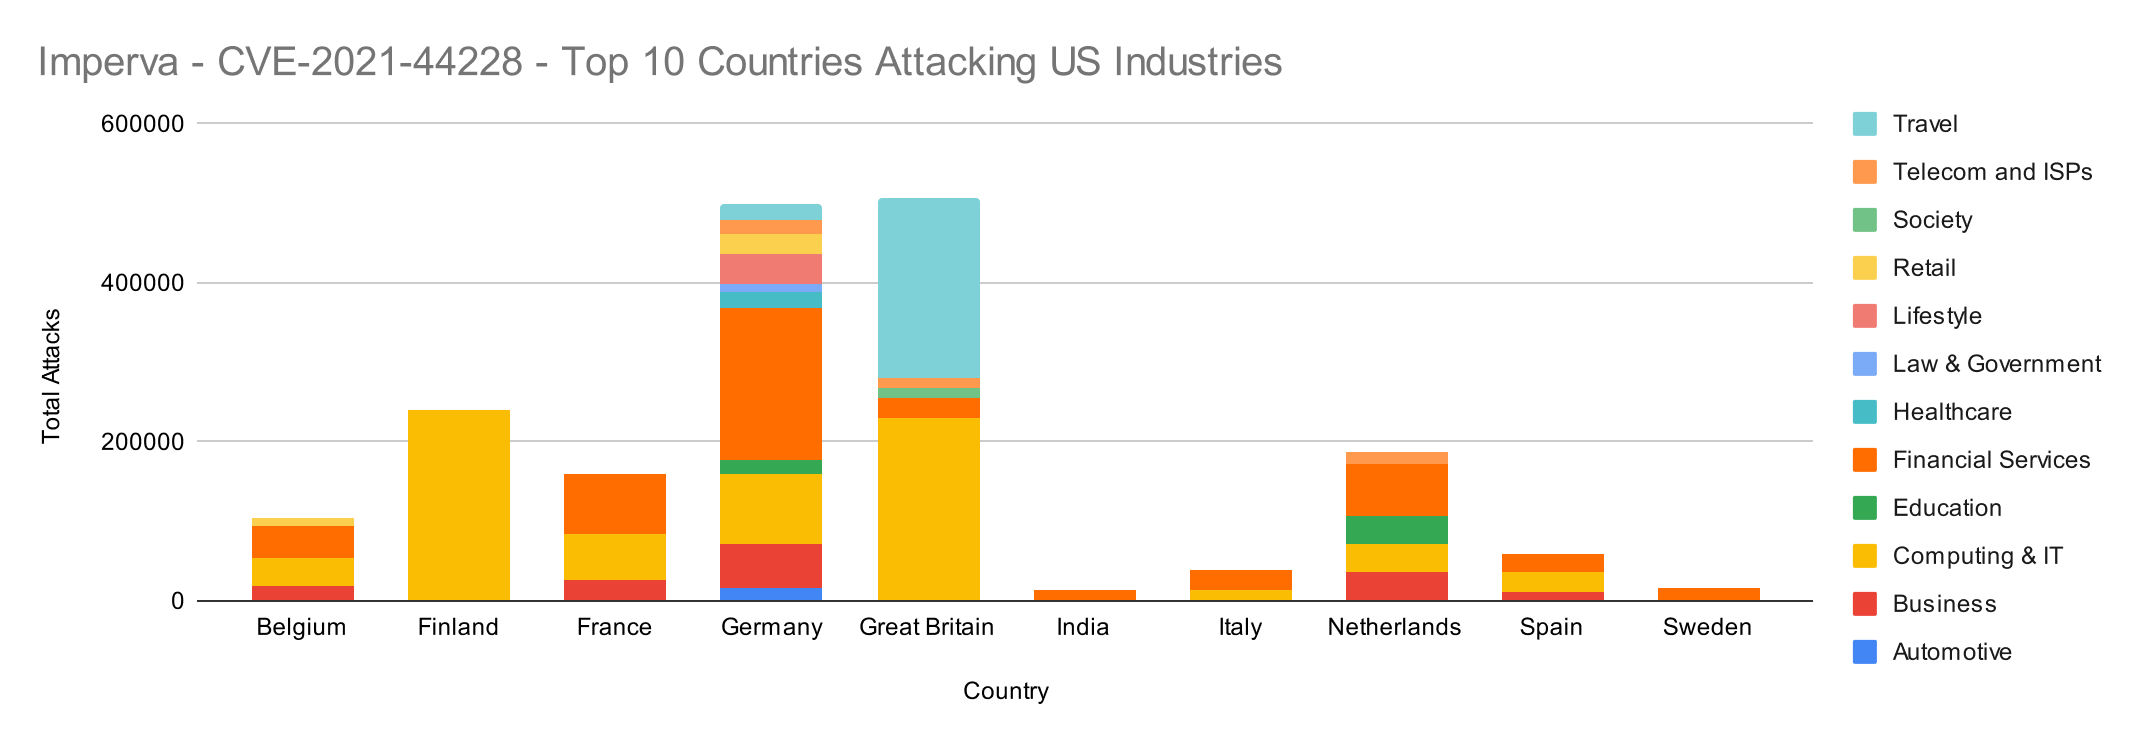 Imperva CVE 2021 44228 Top 10 Countries Attacking US Industries 1